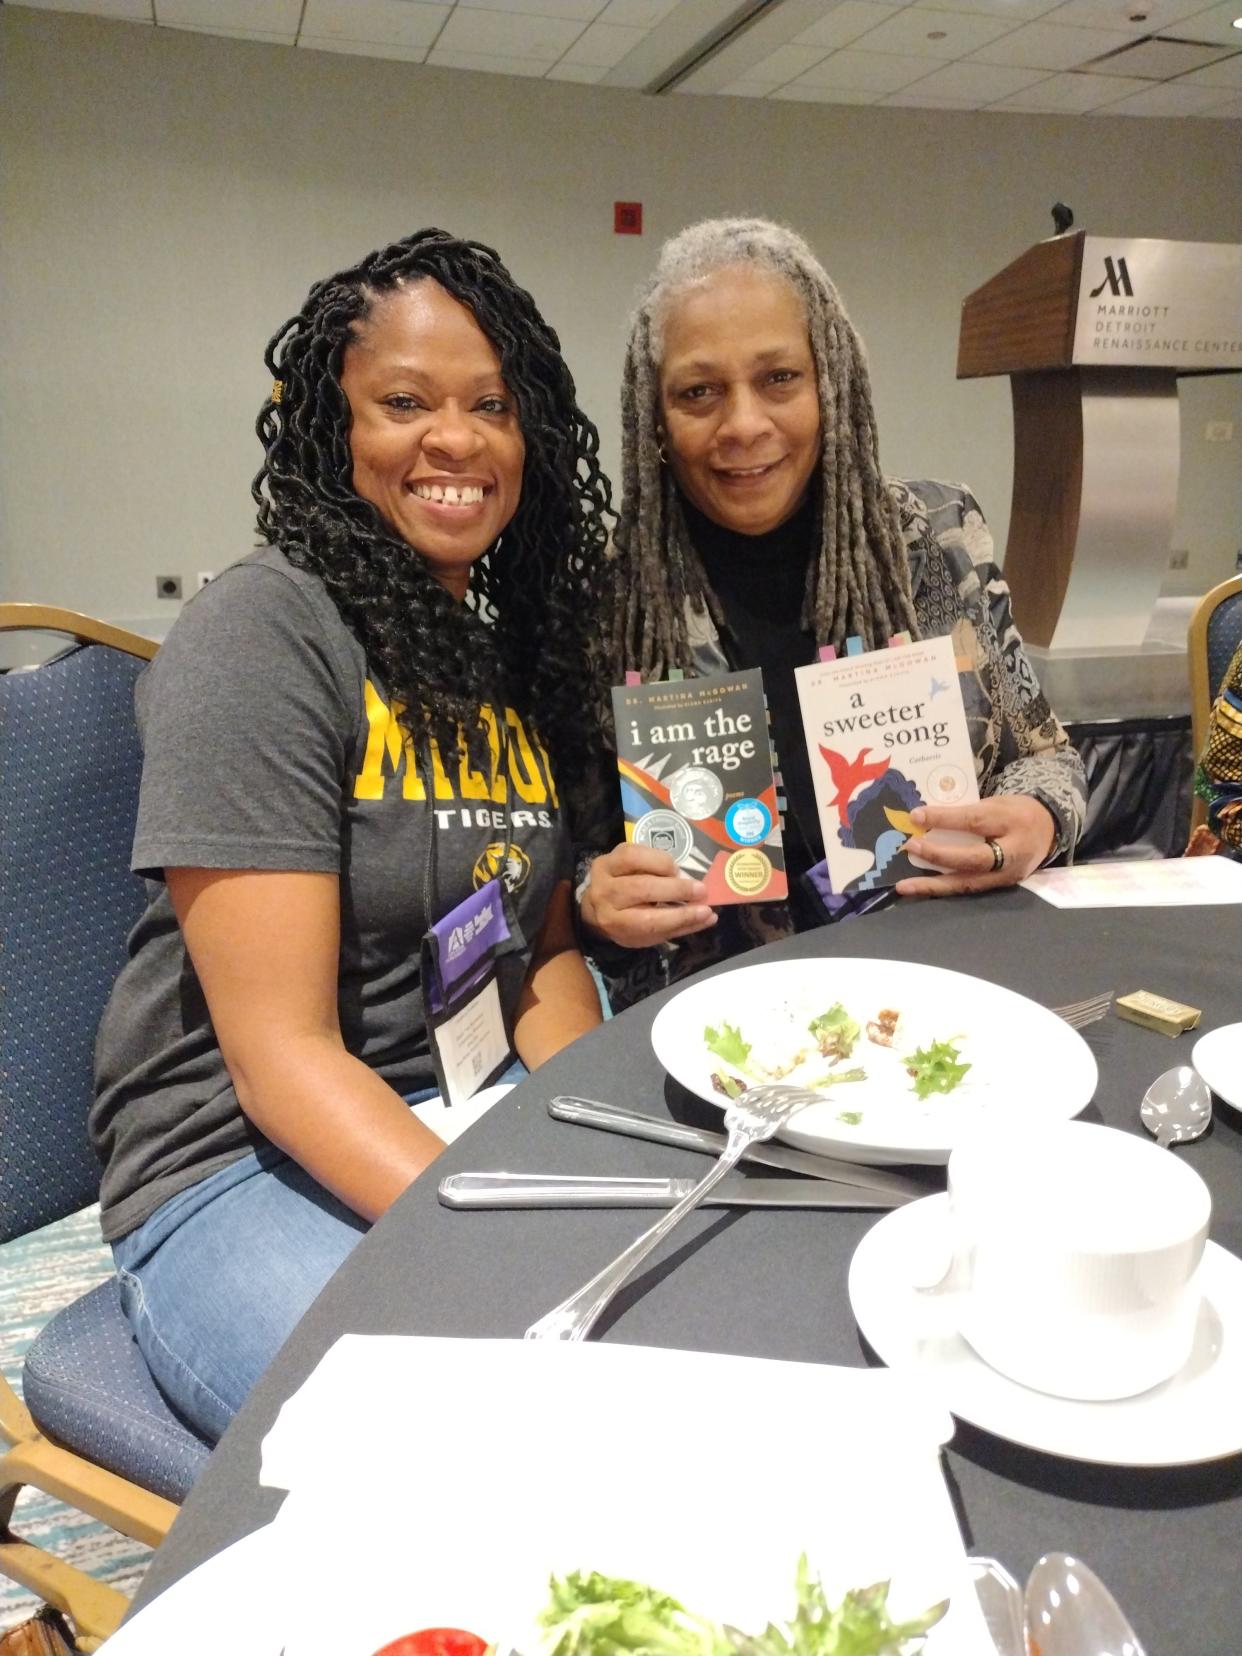 At this year's Heartland Fall Forum literary conference in Detroit, Black Tea Bookshop proprietor Candace Hulsizer (left) met with authors such as Martina McGowan.